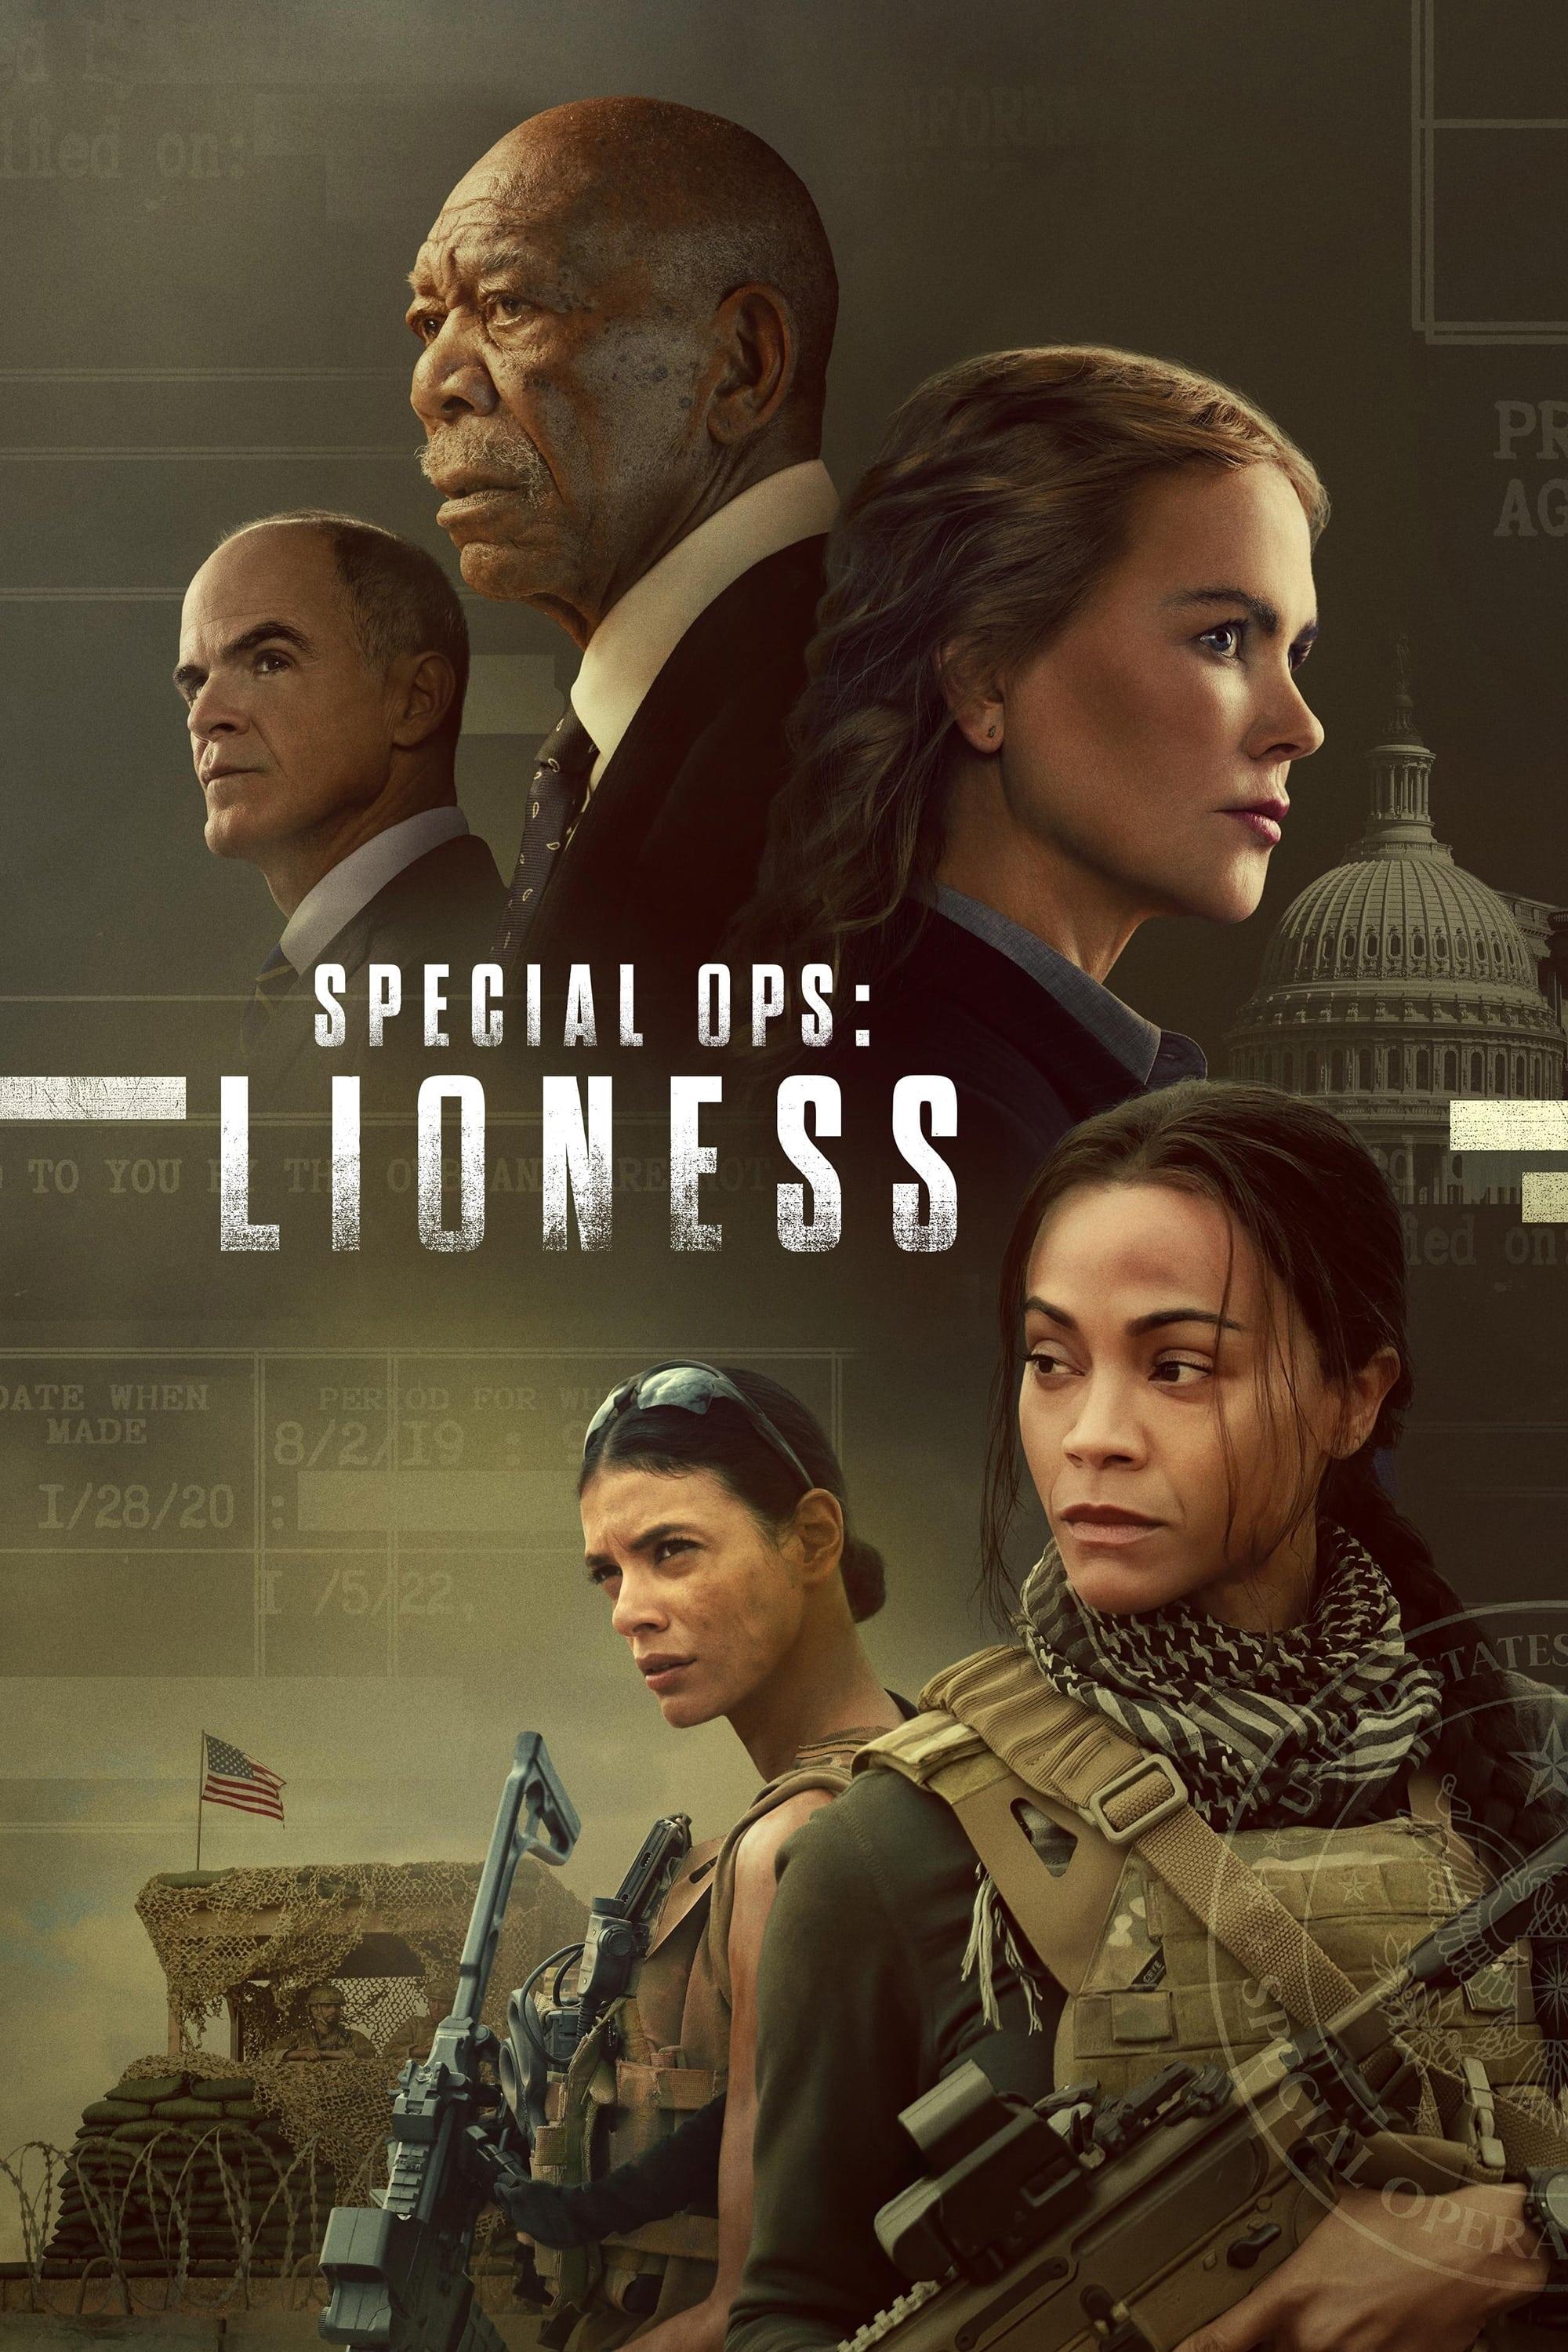 Special Ops: Lioness poster